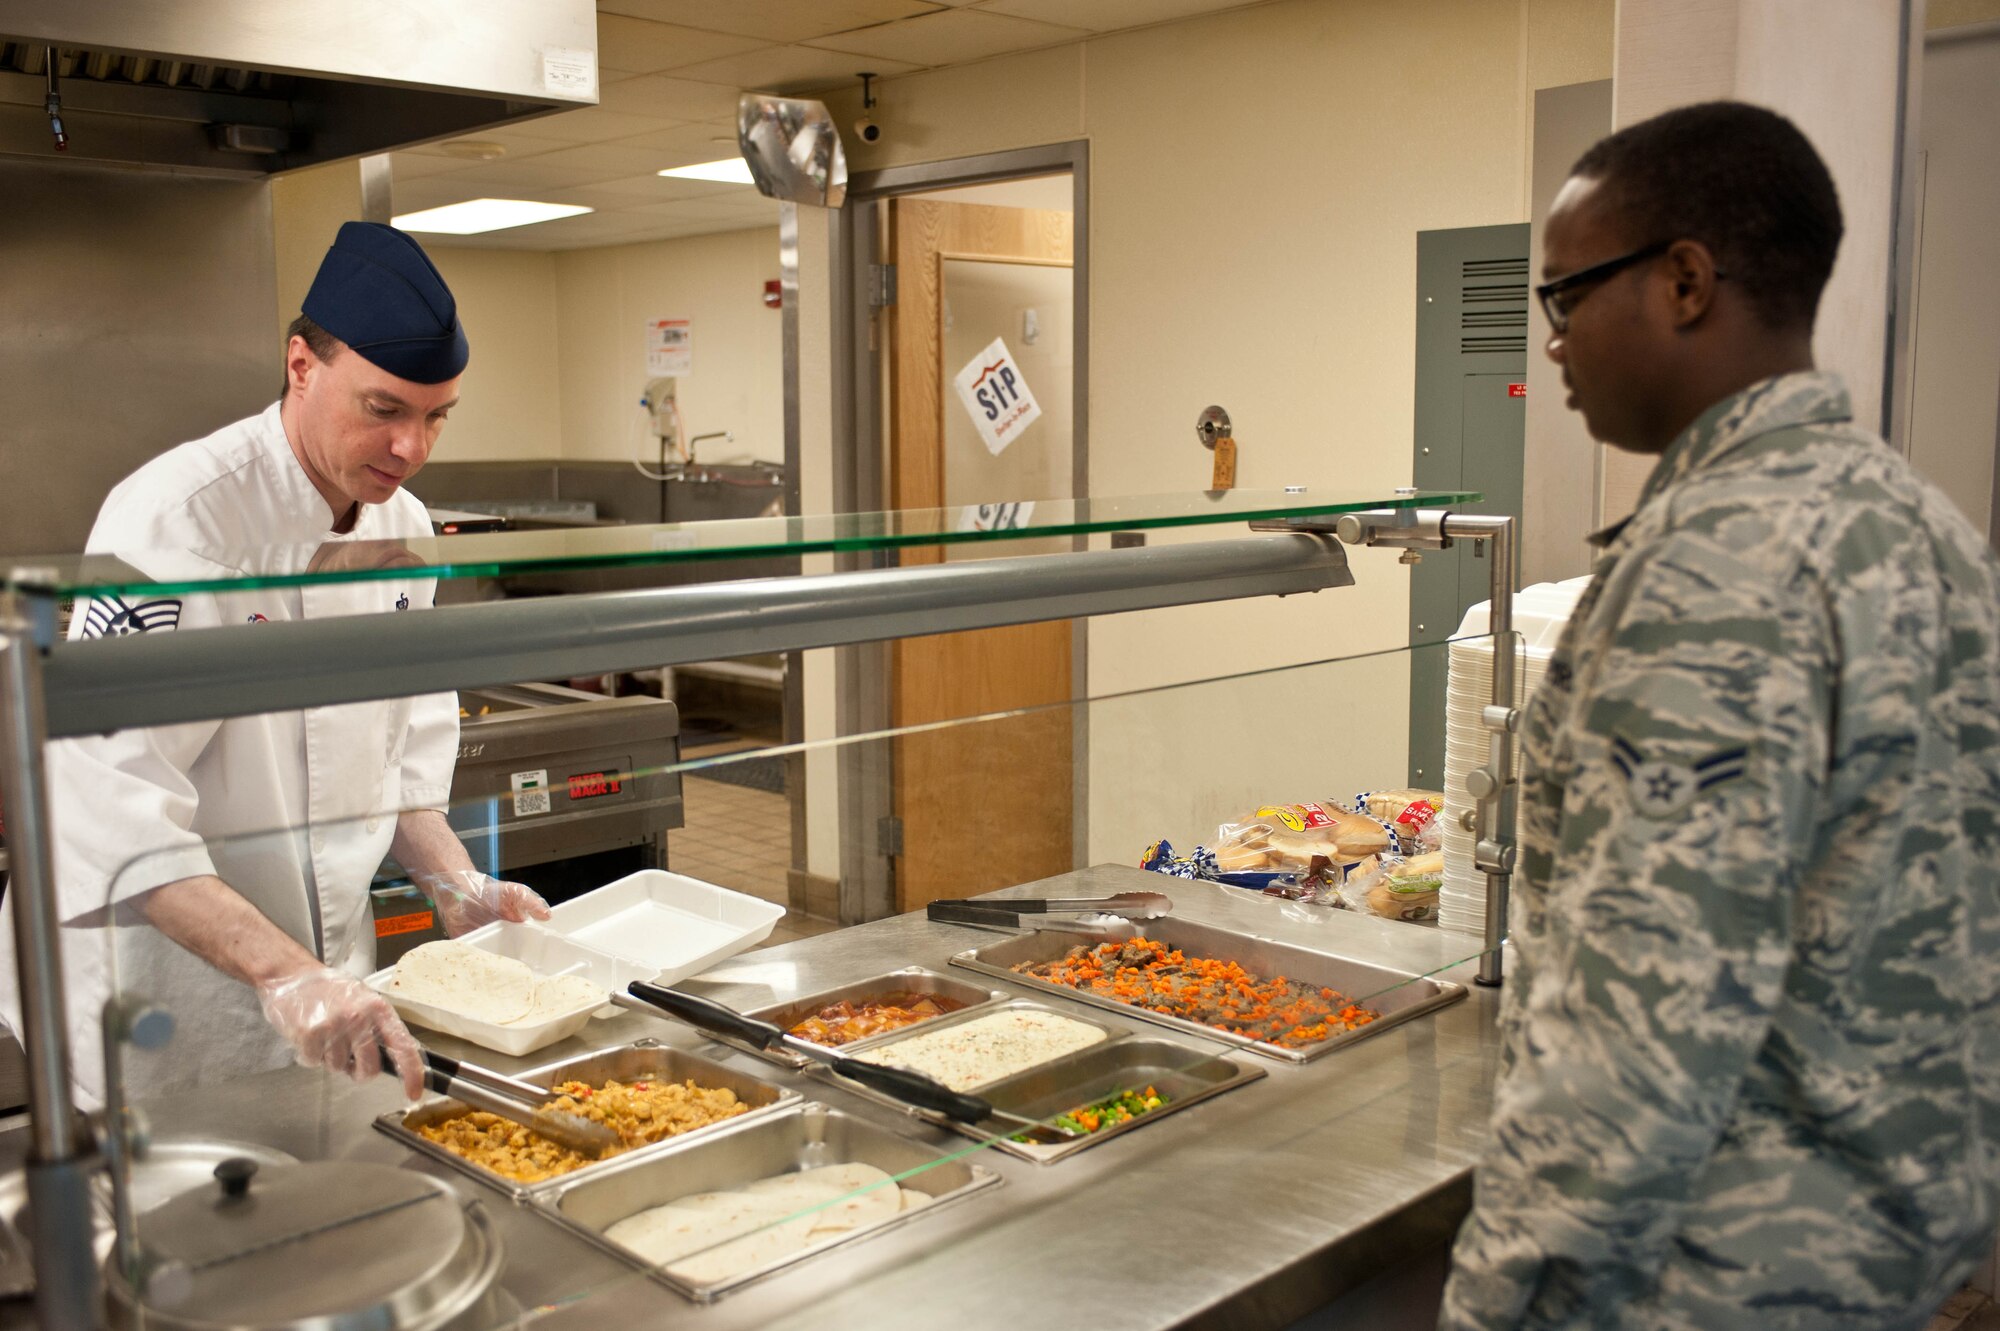 Tech. Sgt. Leigh Pears, 28th Force Support Squadron flight kitchen manager, serves an Airman food in the flight kitchen at Ellsworth Air Force Base, S.D., Dec. 4, 2012. The Air Force operates more than 270 dining facilities and flight kitchens worldwide. (U.S. Air Force photo by Airman 1st Class Zachary Hada/Released)